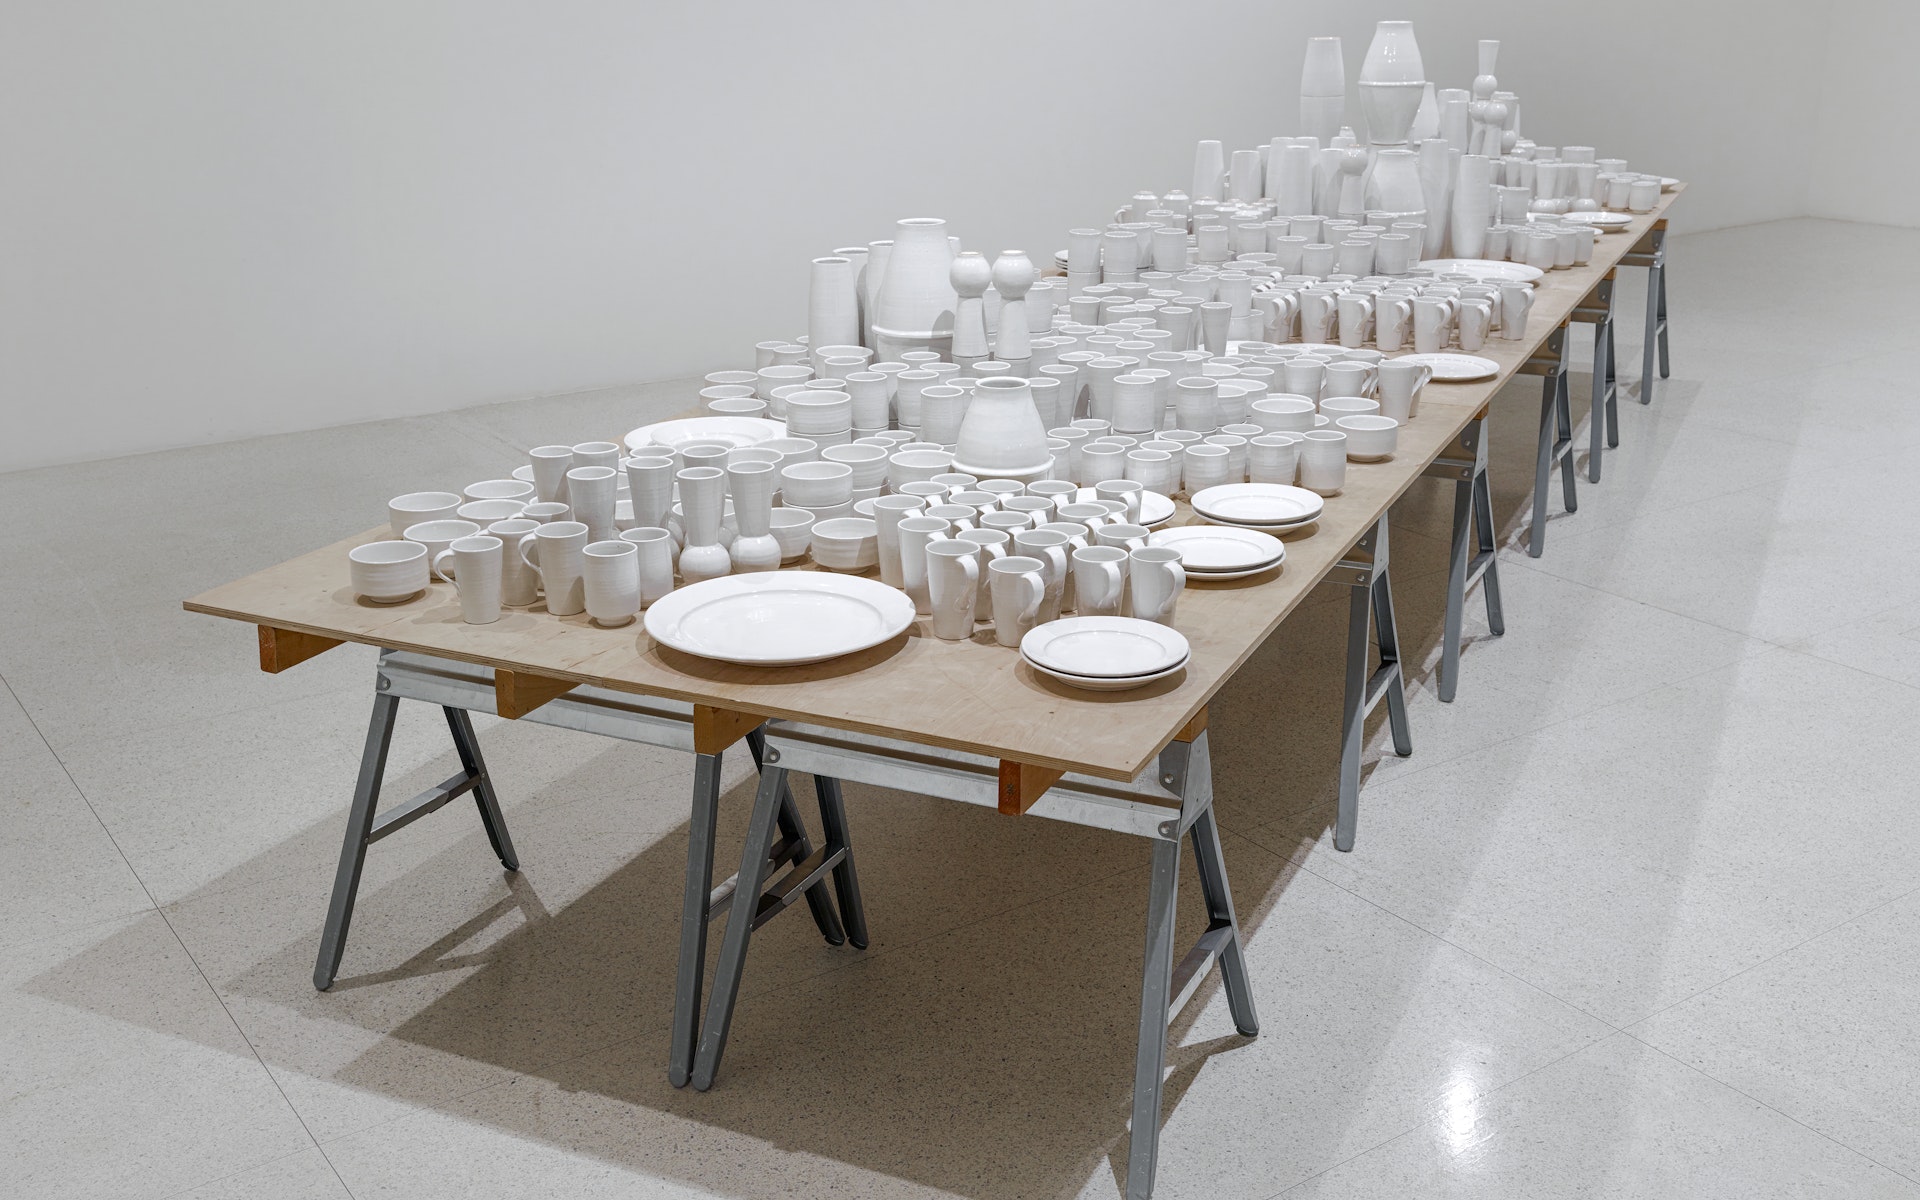 A variety of white cermaic cups, plates, bowls, and vases are collected on a wooden table with metal saw horse legs.